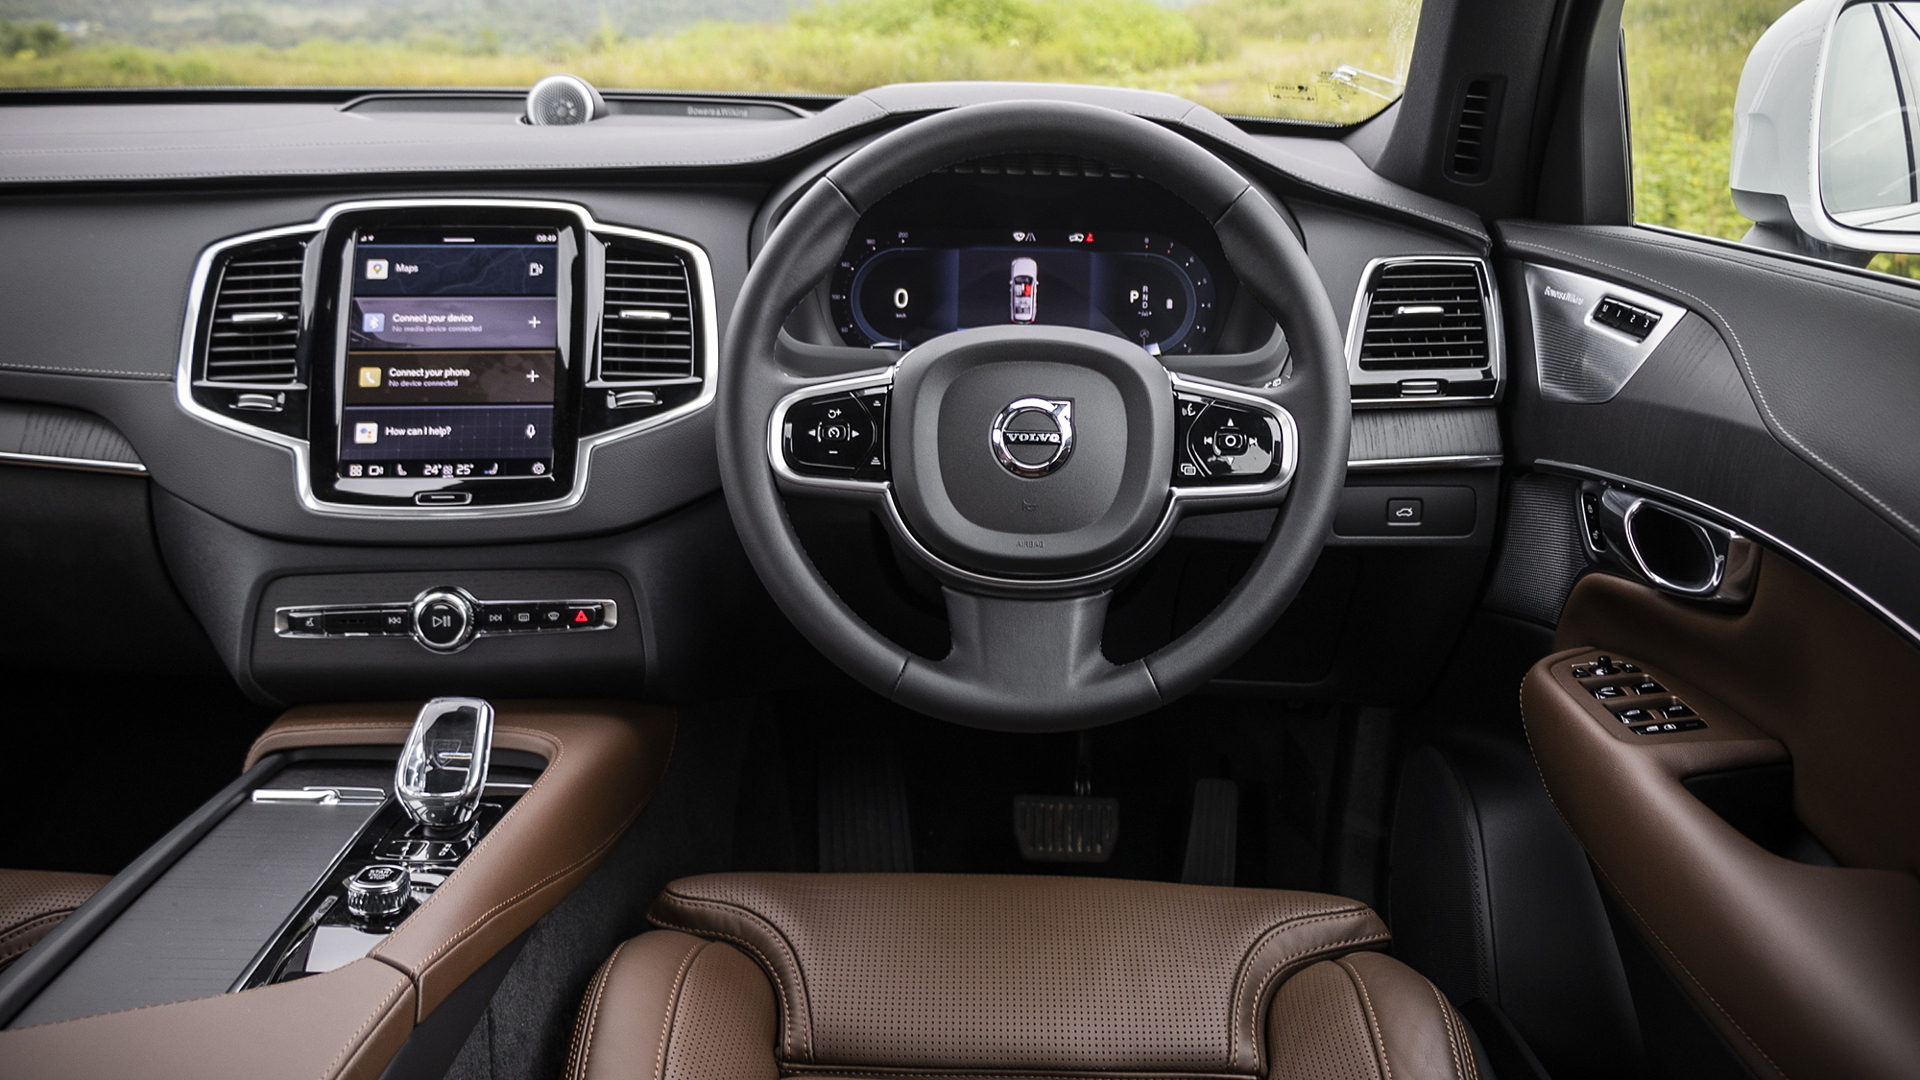 Volvo XC90 Images - Interior & Exterior Photo Gallery [200+ Images] -  CarWale